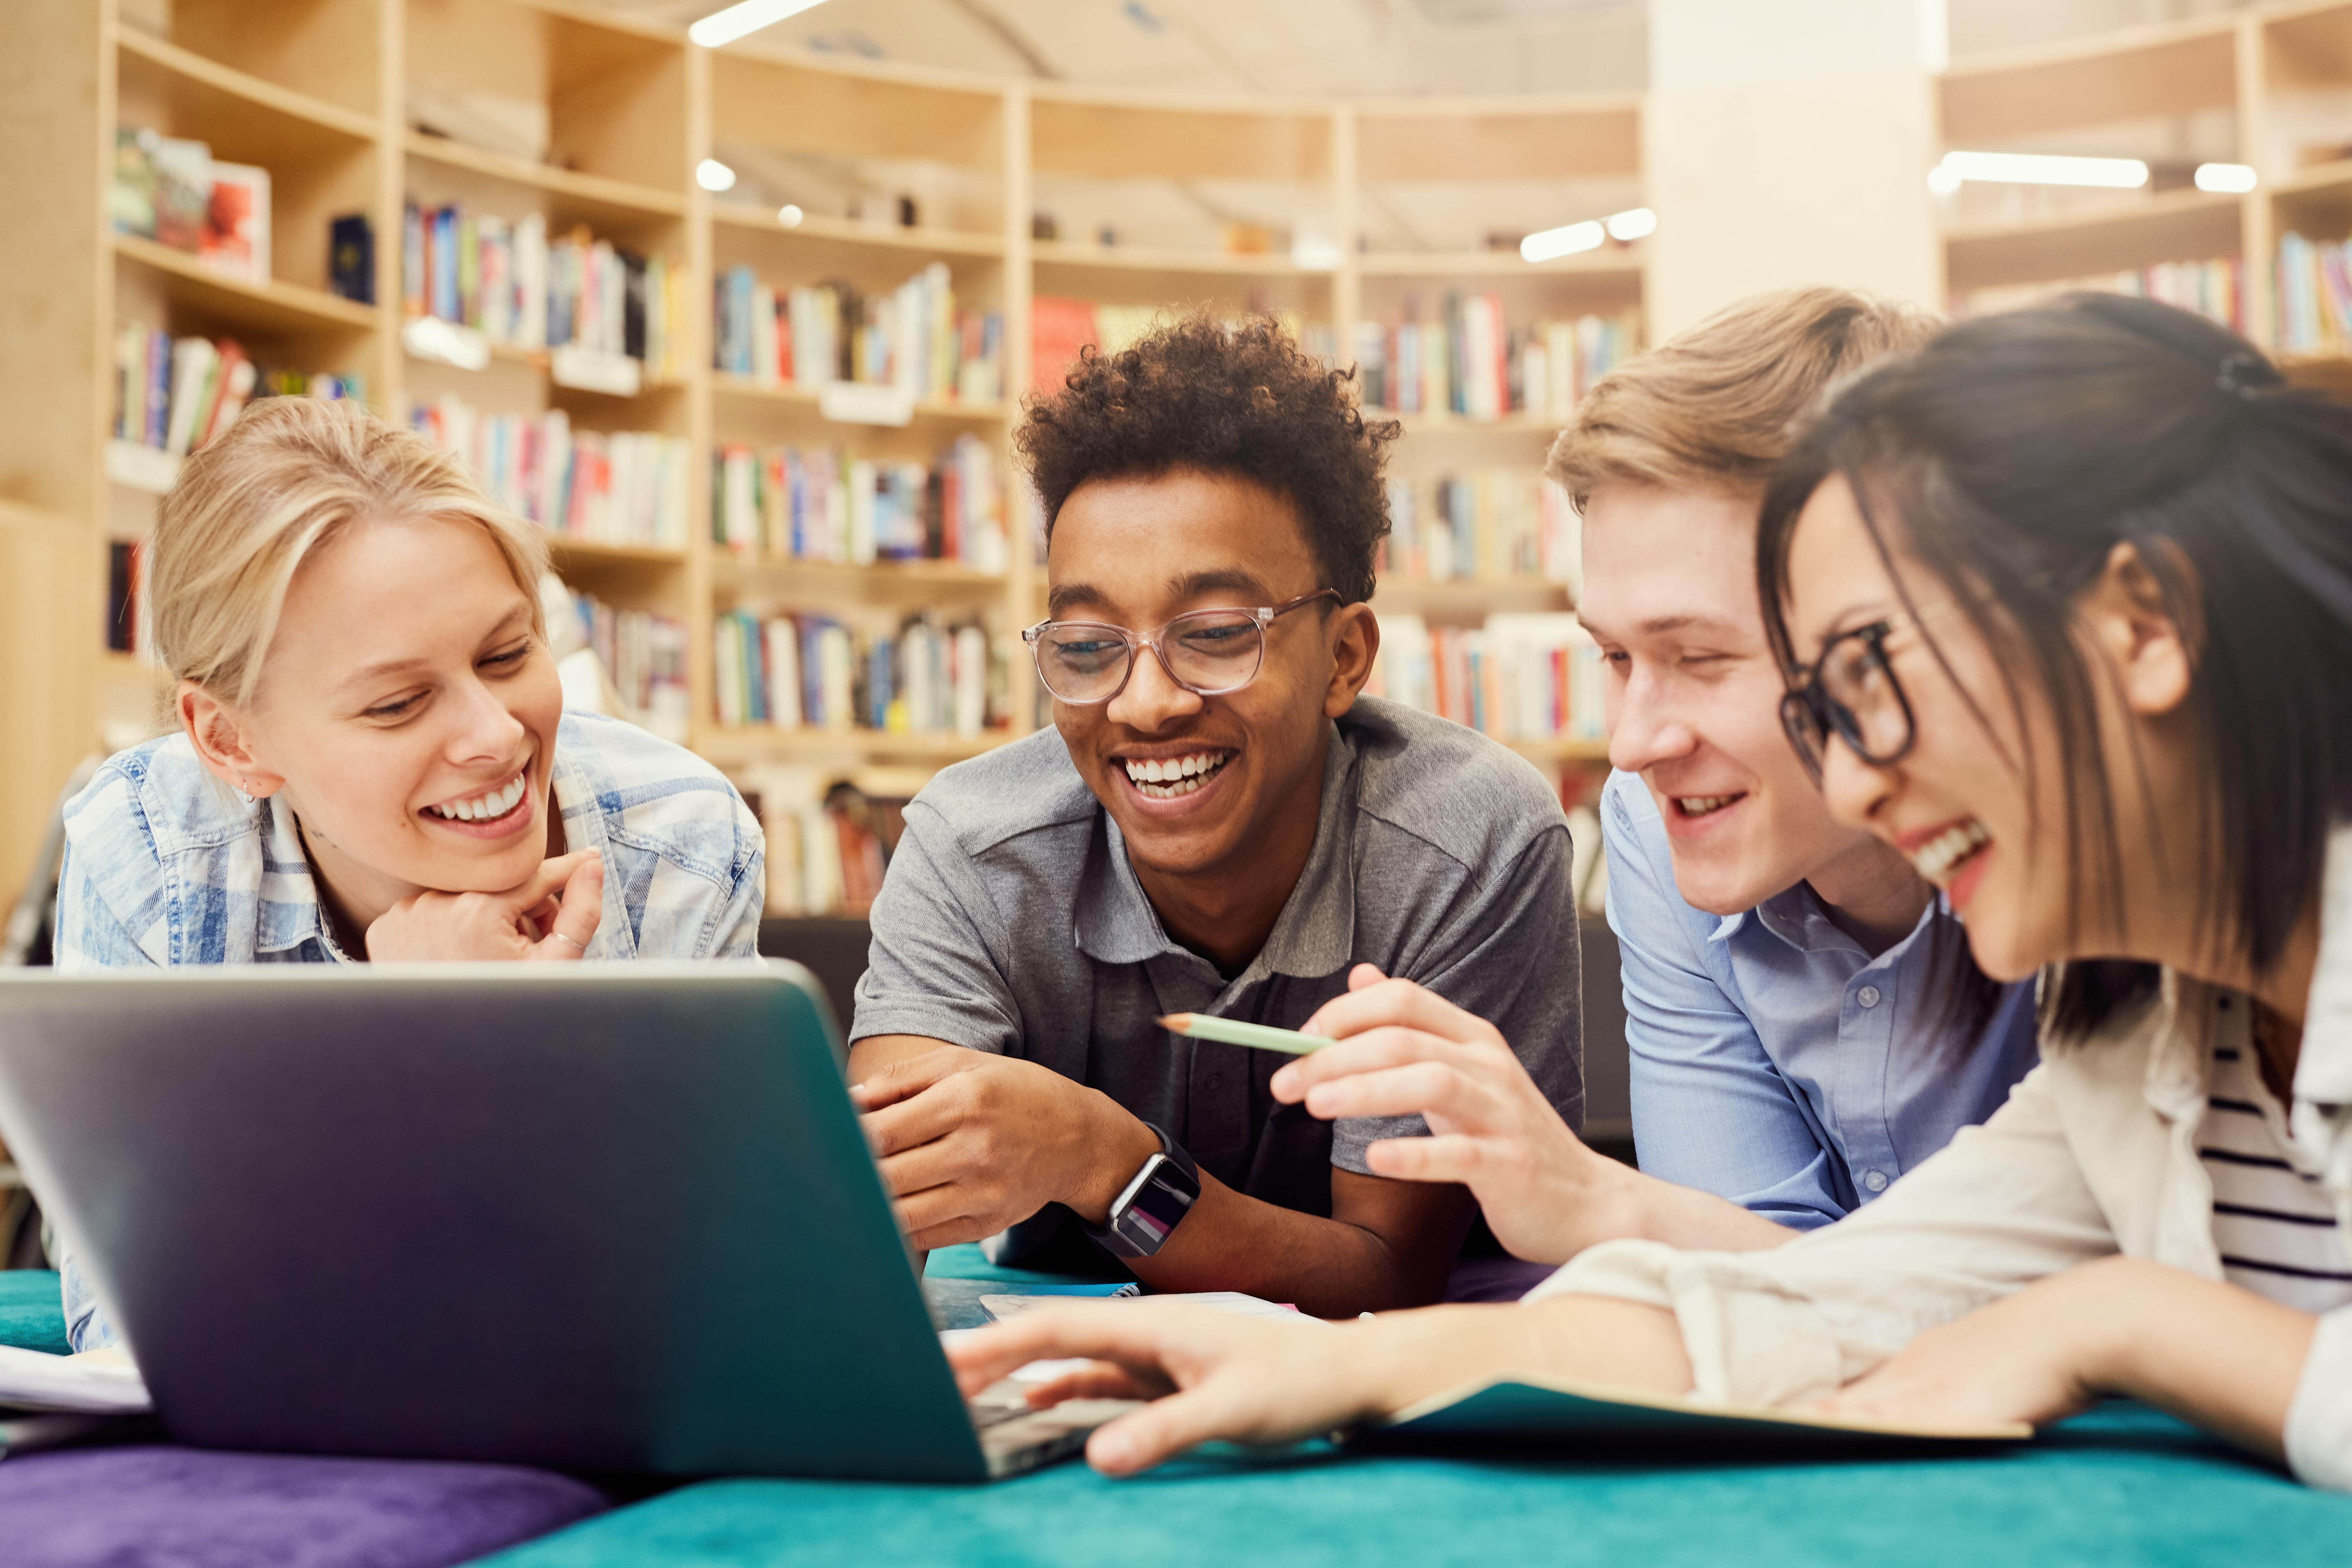 A diverse group of four teenagers sitting in a library looking at a computer together.